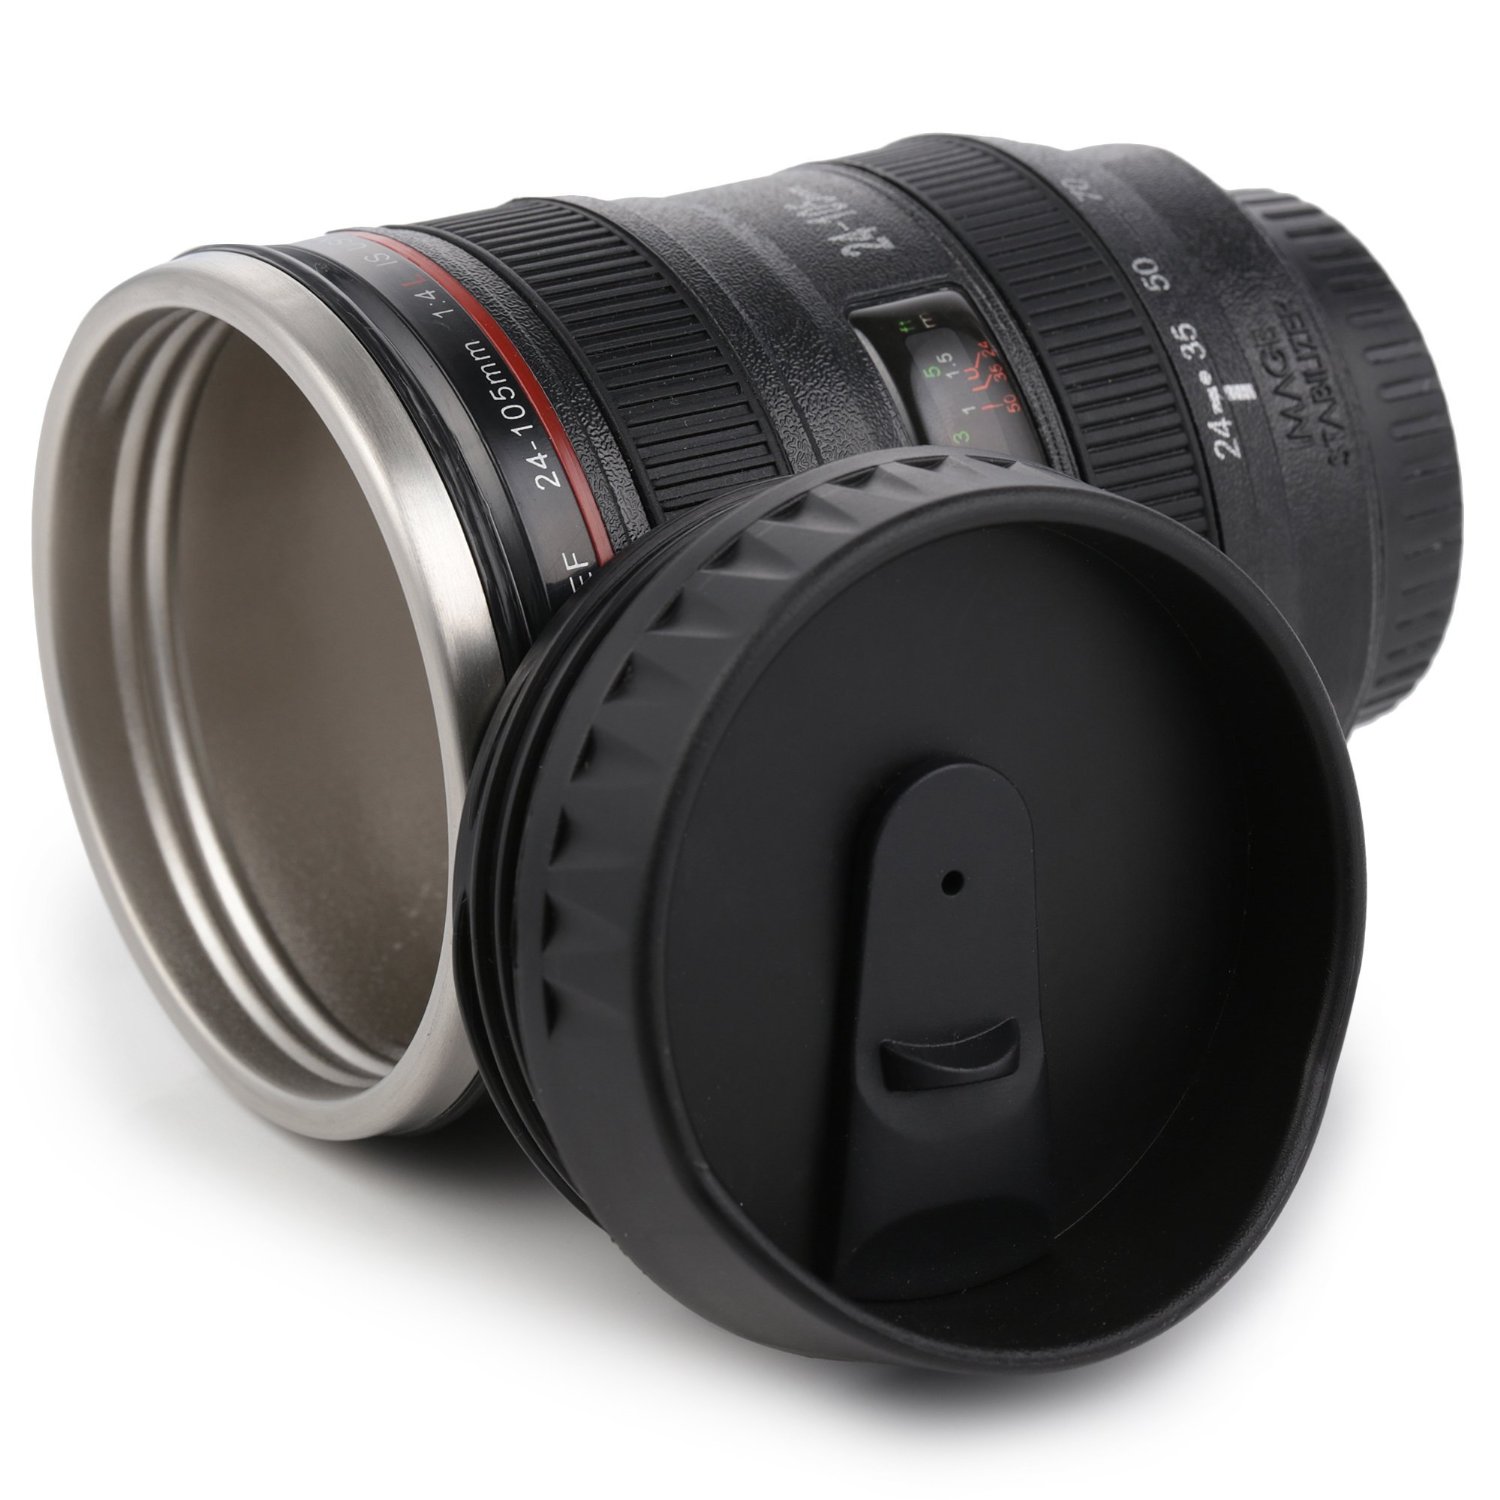 Camera Lens Travel Cup - Open on side